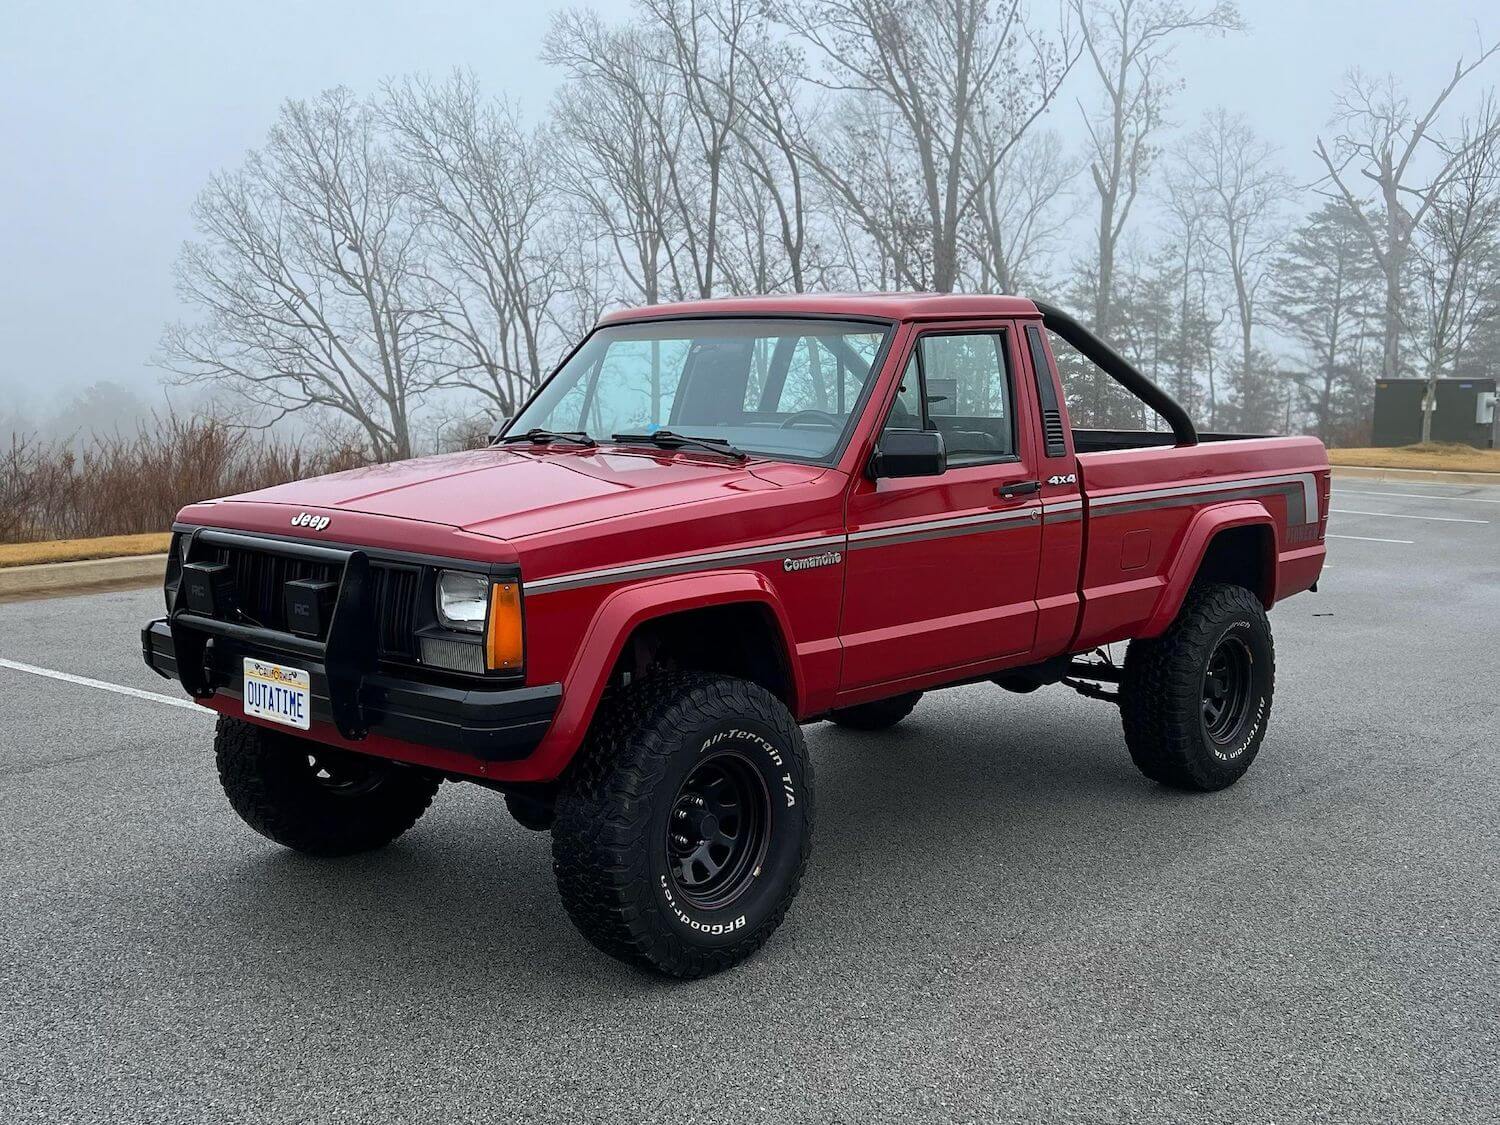 The front of a used Jeep Comanche classic truck fitted with a lift kit and rollbar.